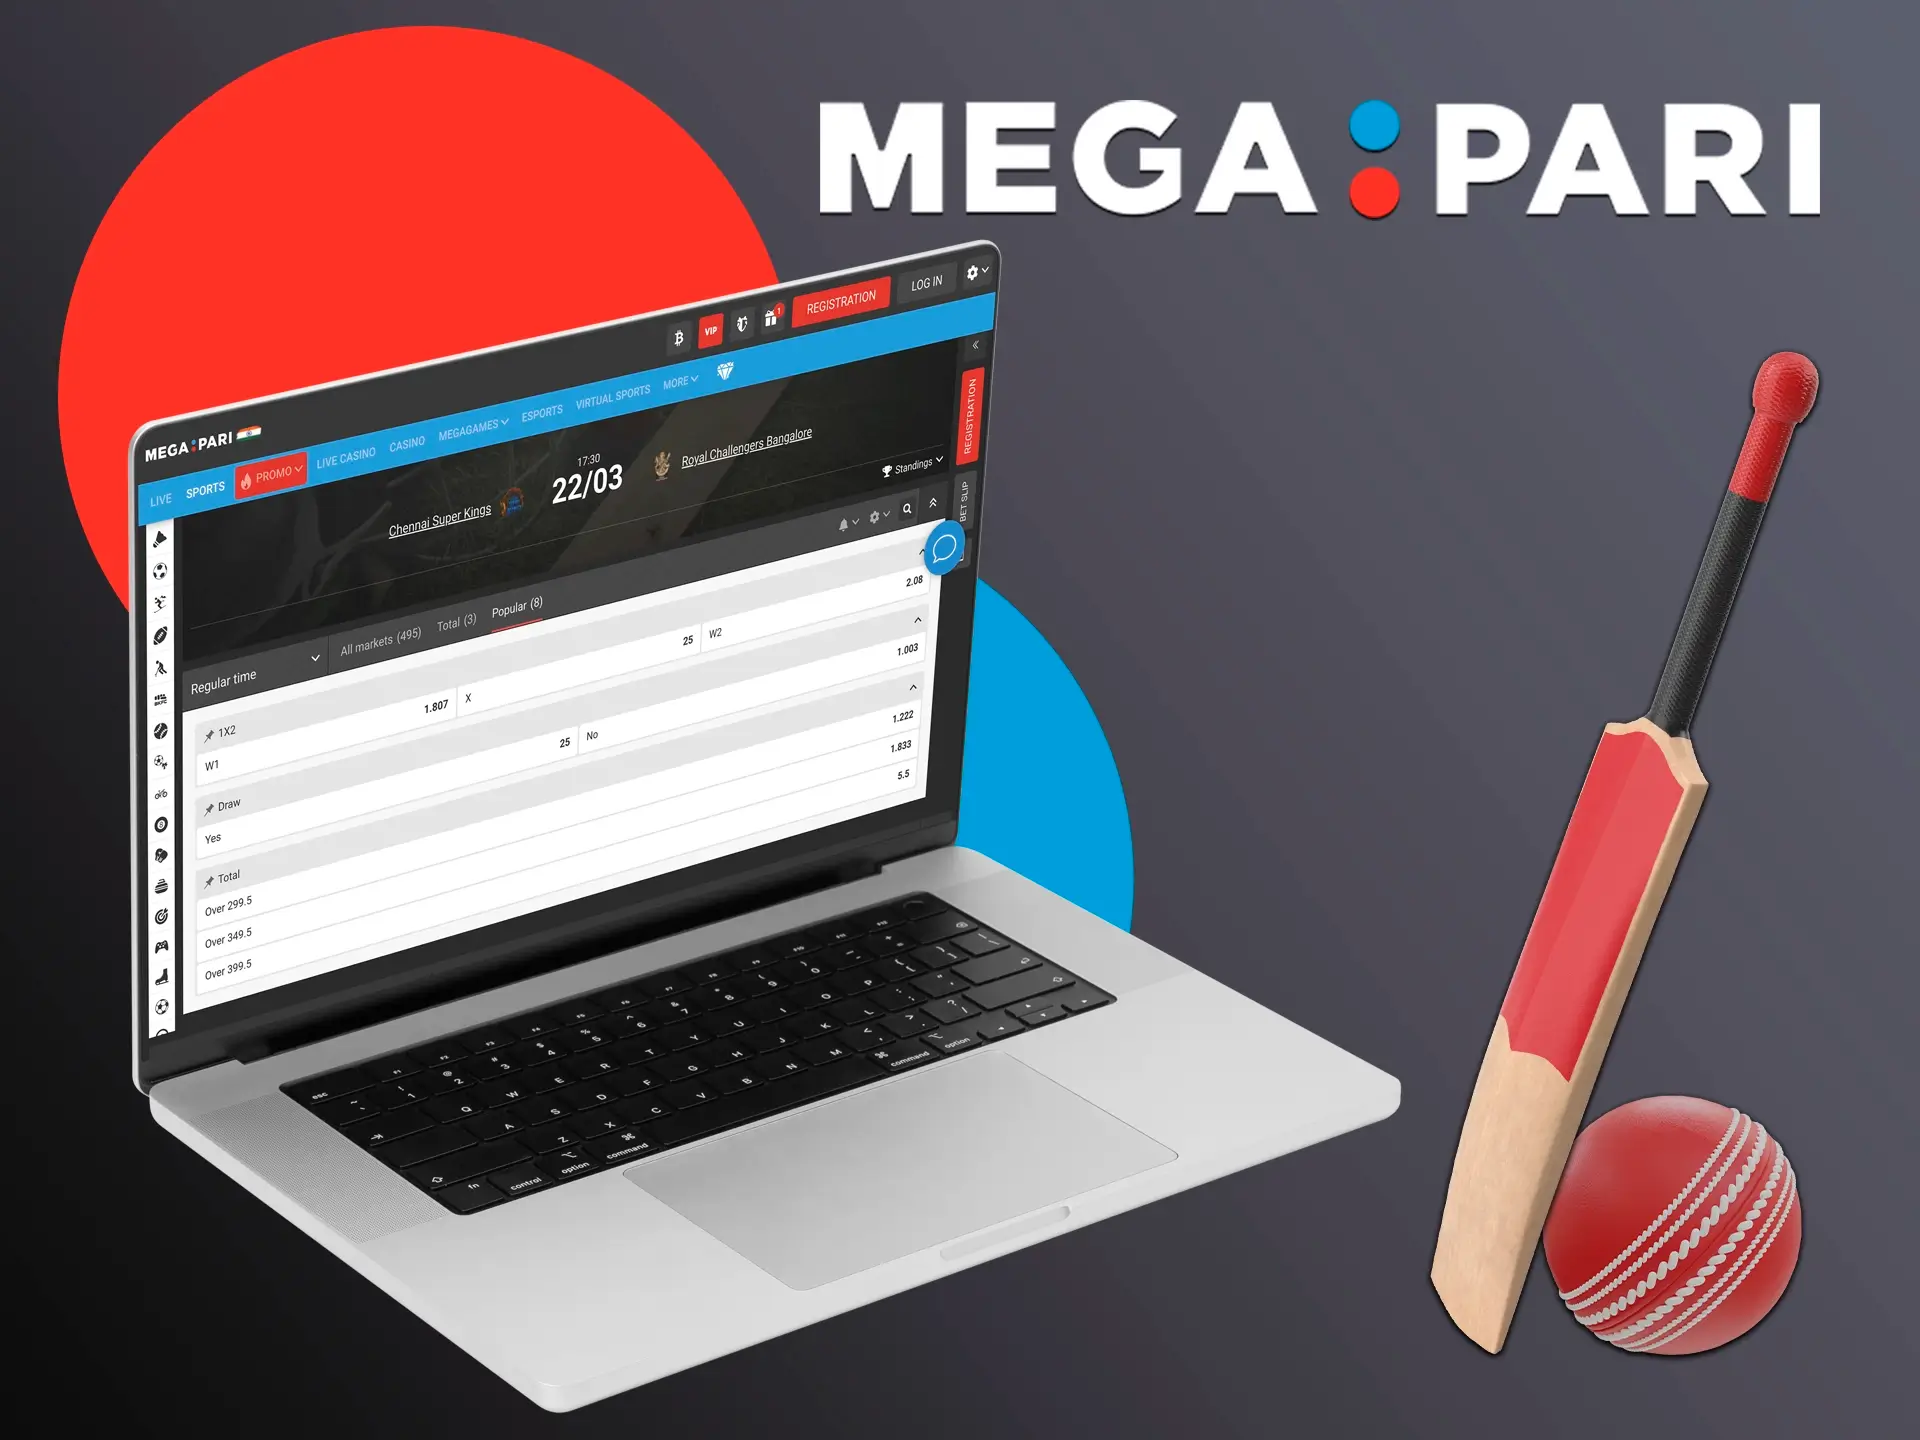 Use the opportunity to make live predictions in Megapari on exact and specific match events using the Satta service.